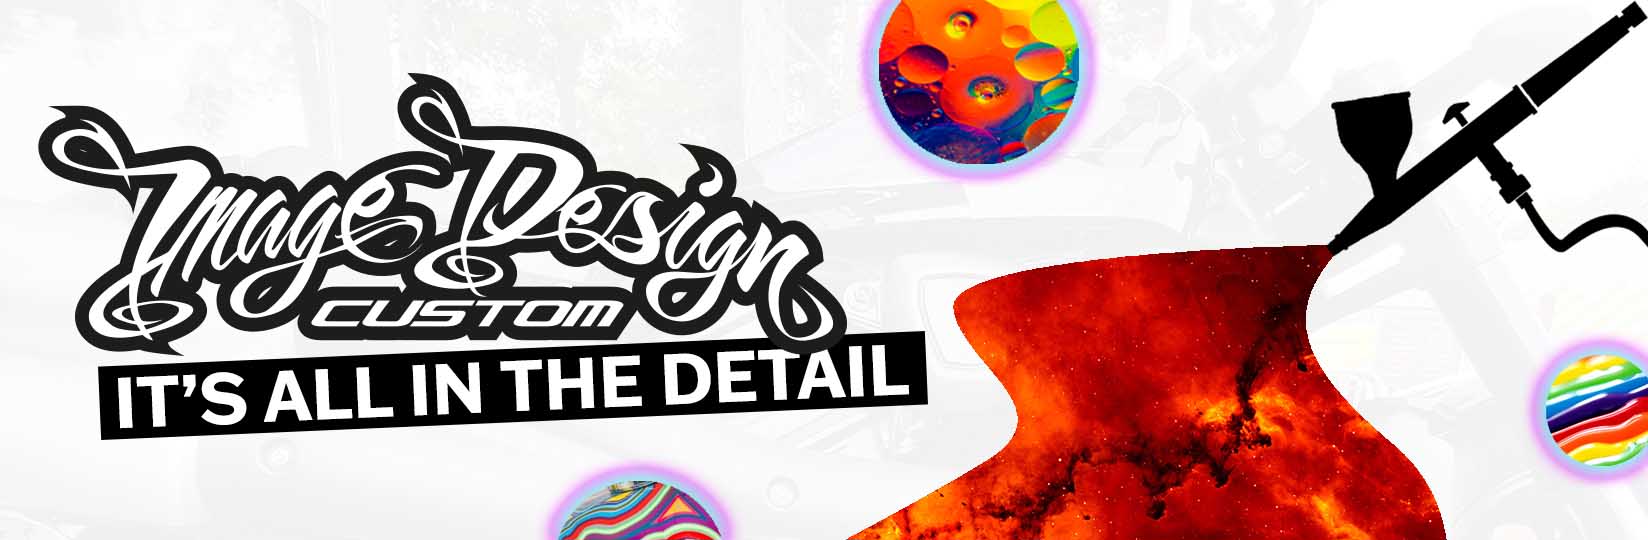 Image Design Custom - It's all in the detail banner